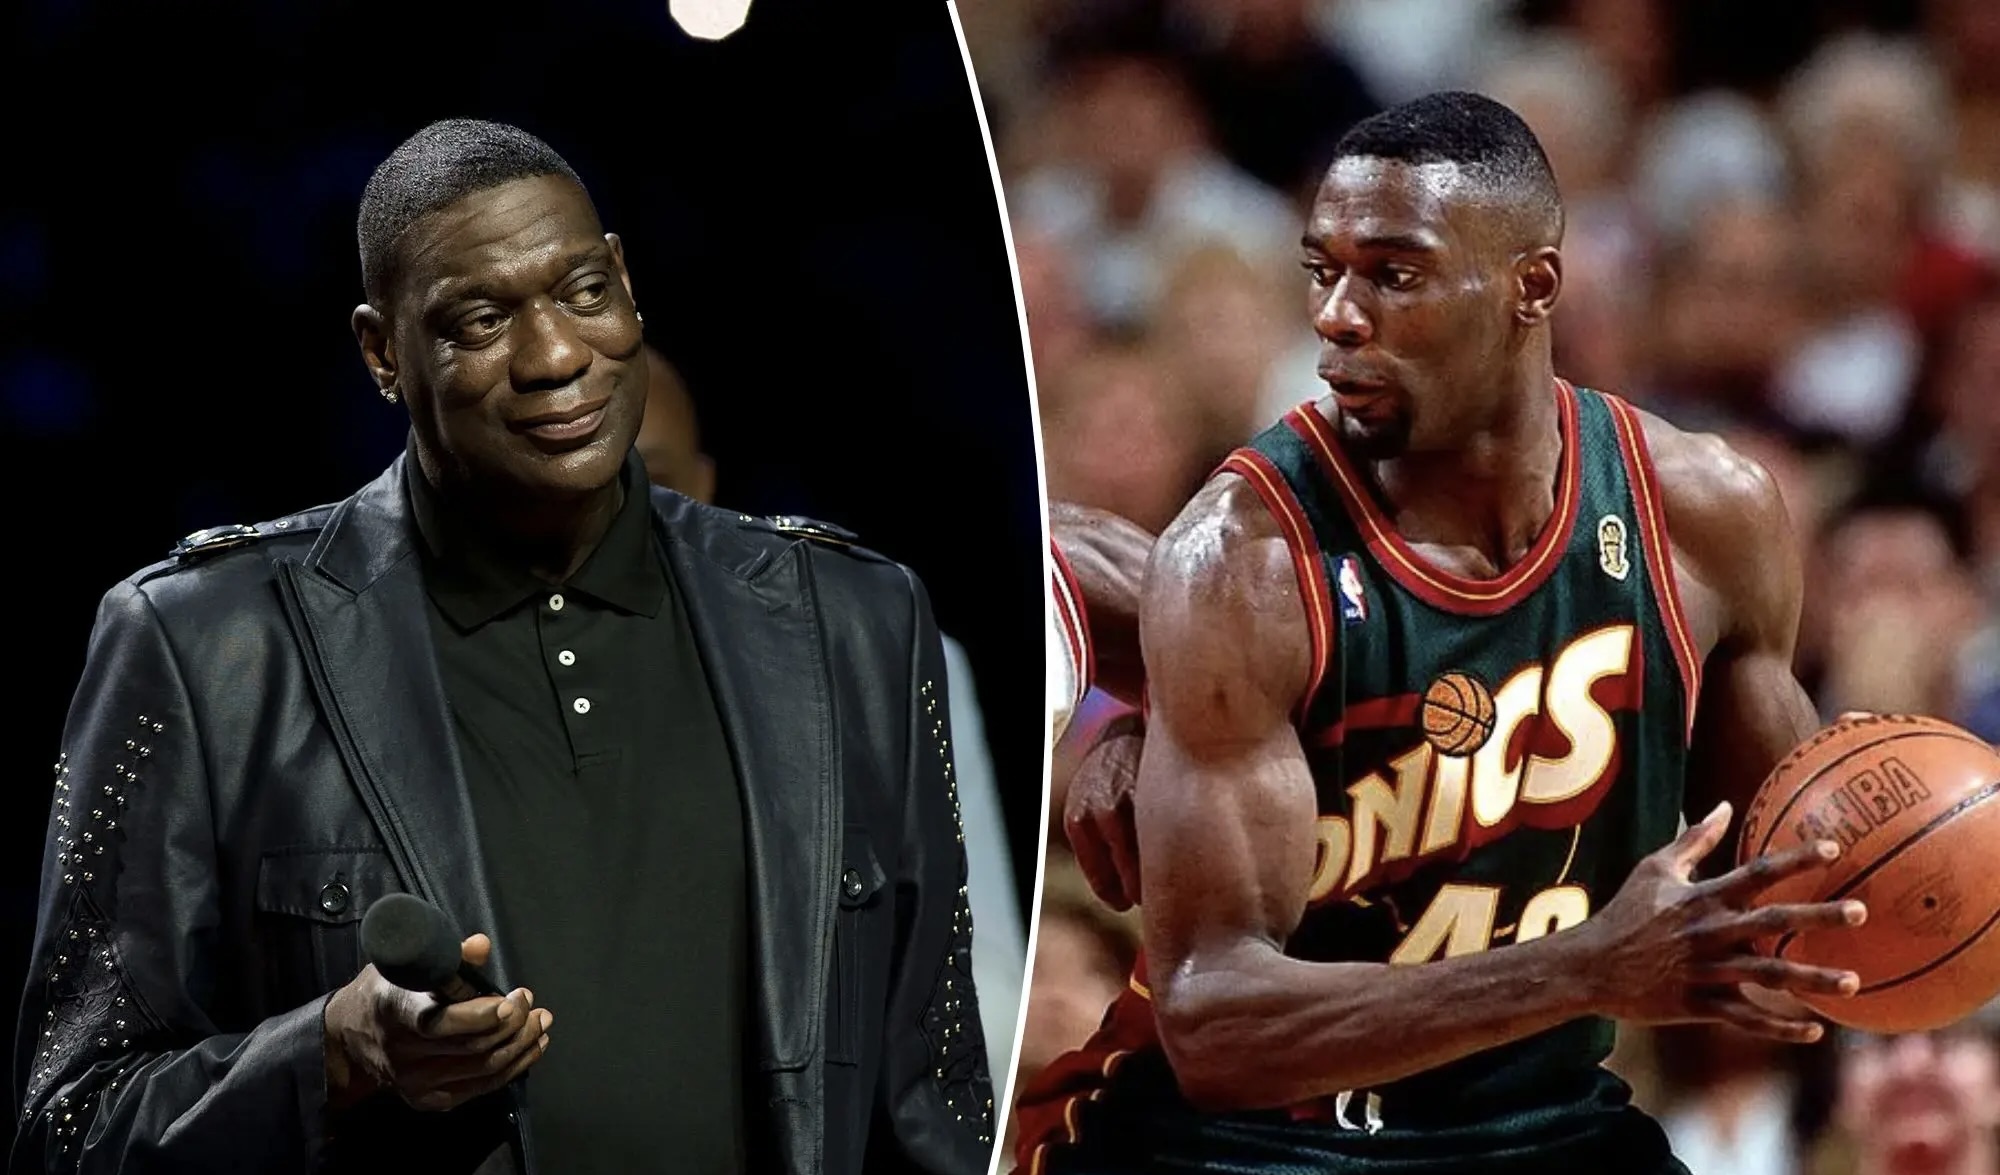 Shawn Kemp’s Alleged Drive-By Shooting Incident Caught on Shocking Video